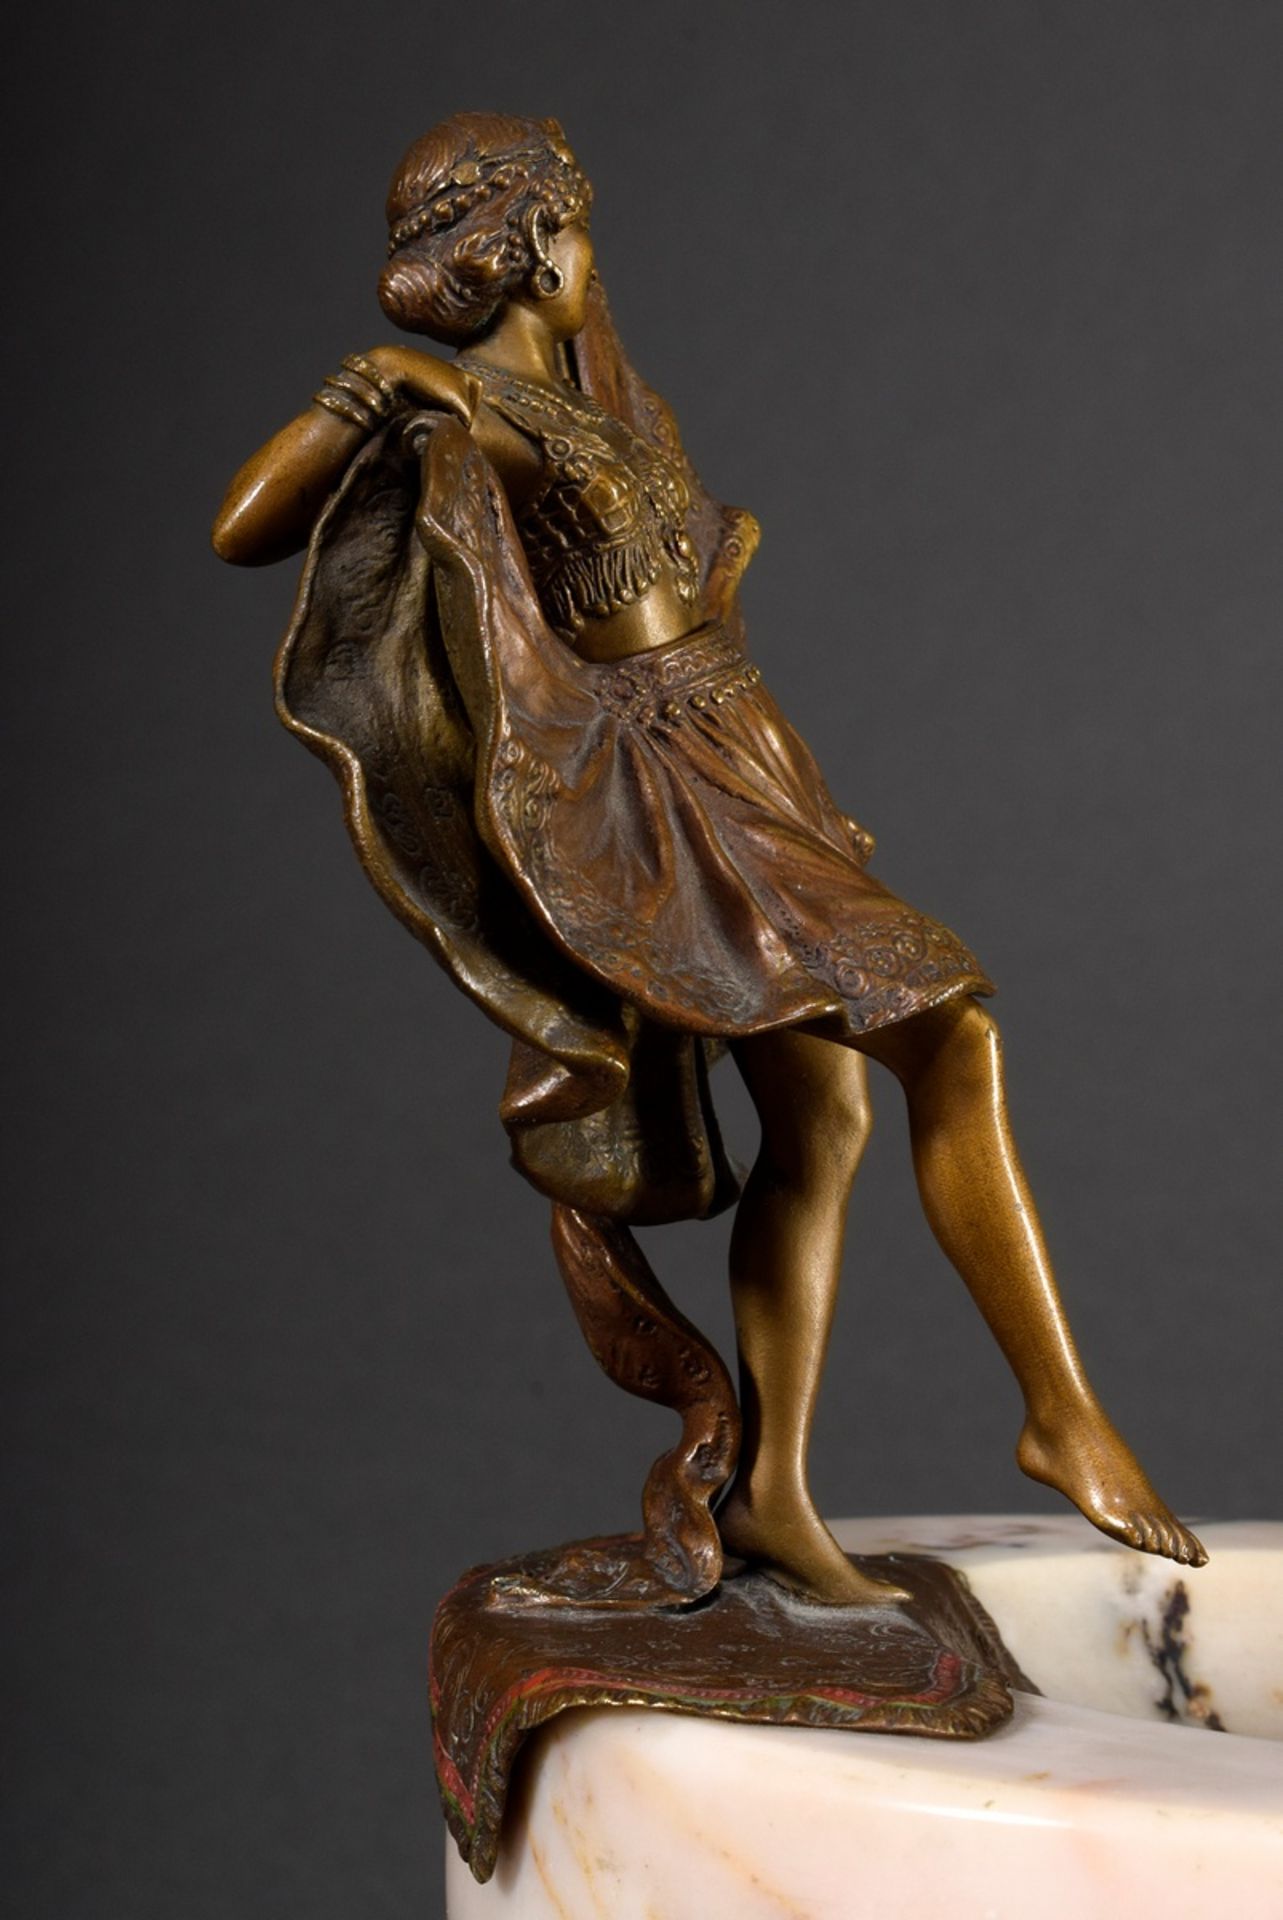 Marble business card tray with Viennese bronze figure "Erotic dancer with folding skirt", discreetl - Image 6 of 9